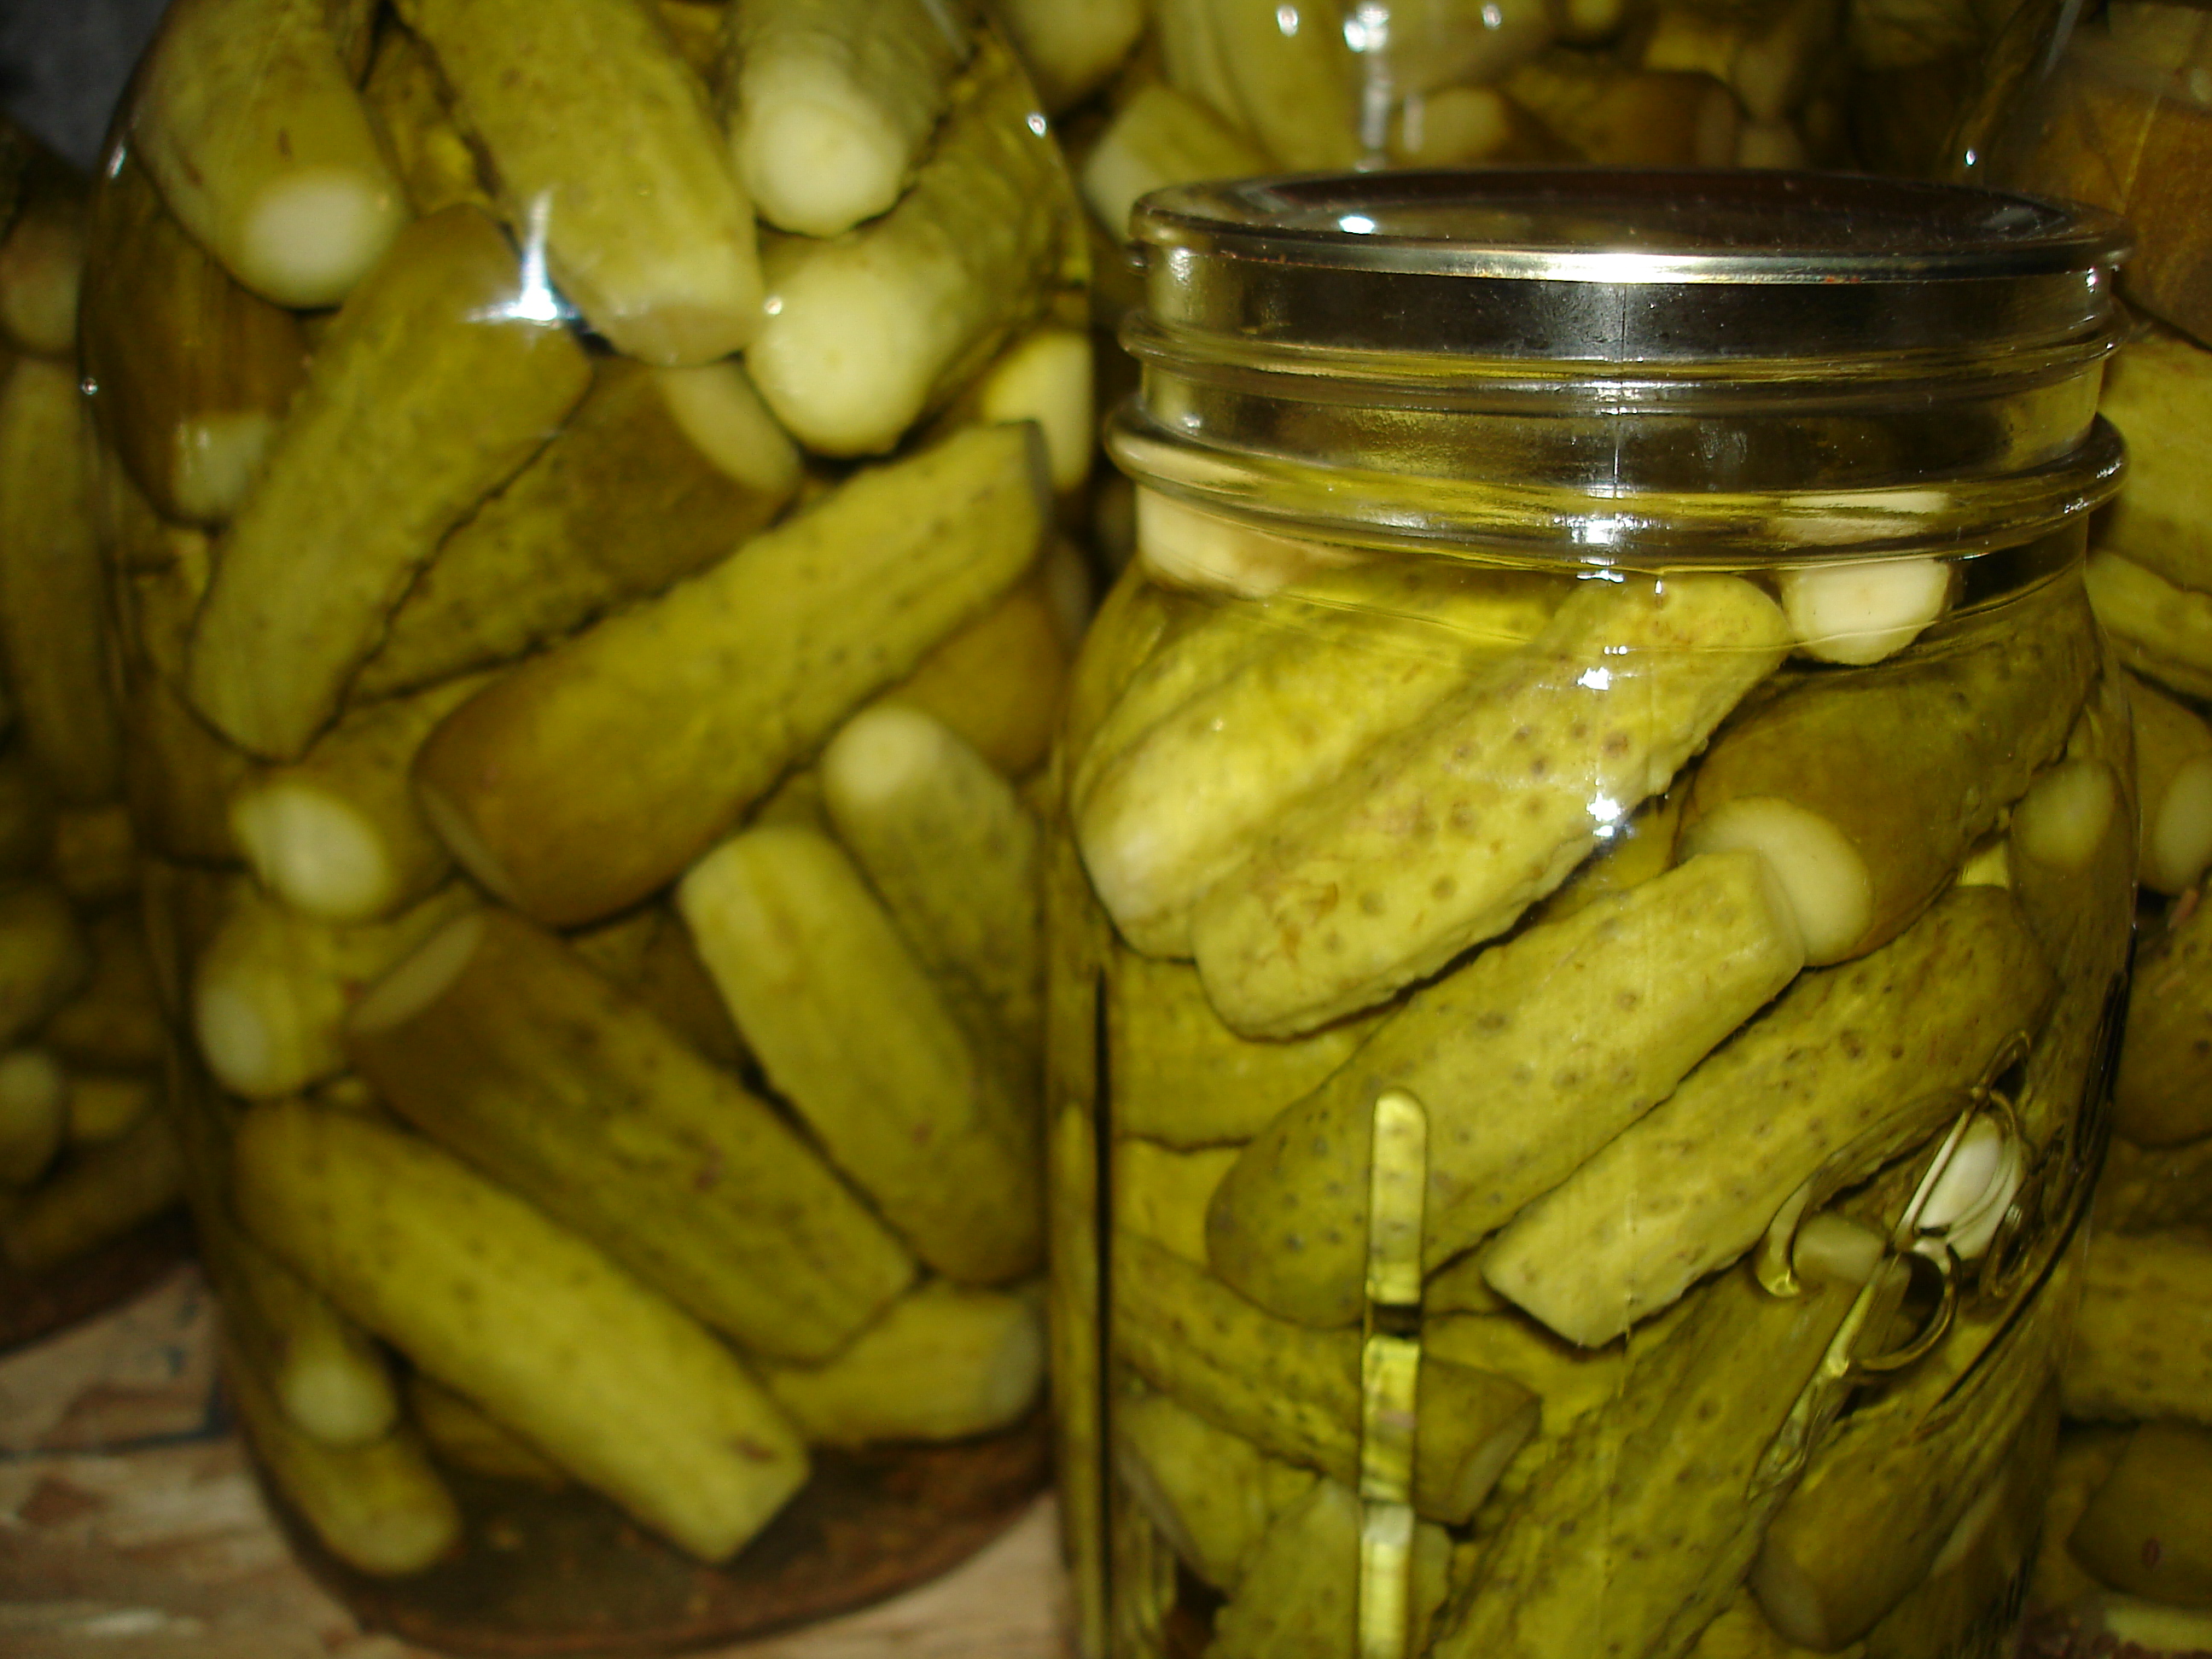 Pickles Full Hd Wallpaper And Background Image 2592x1944 HD Wallpapers Download Free Map Images Wallpaper [wallpaper684.blogspot.com]